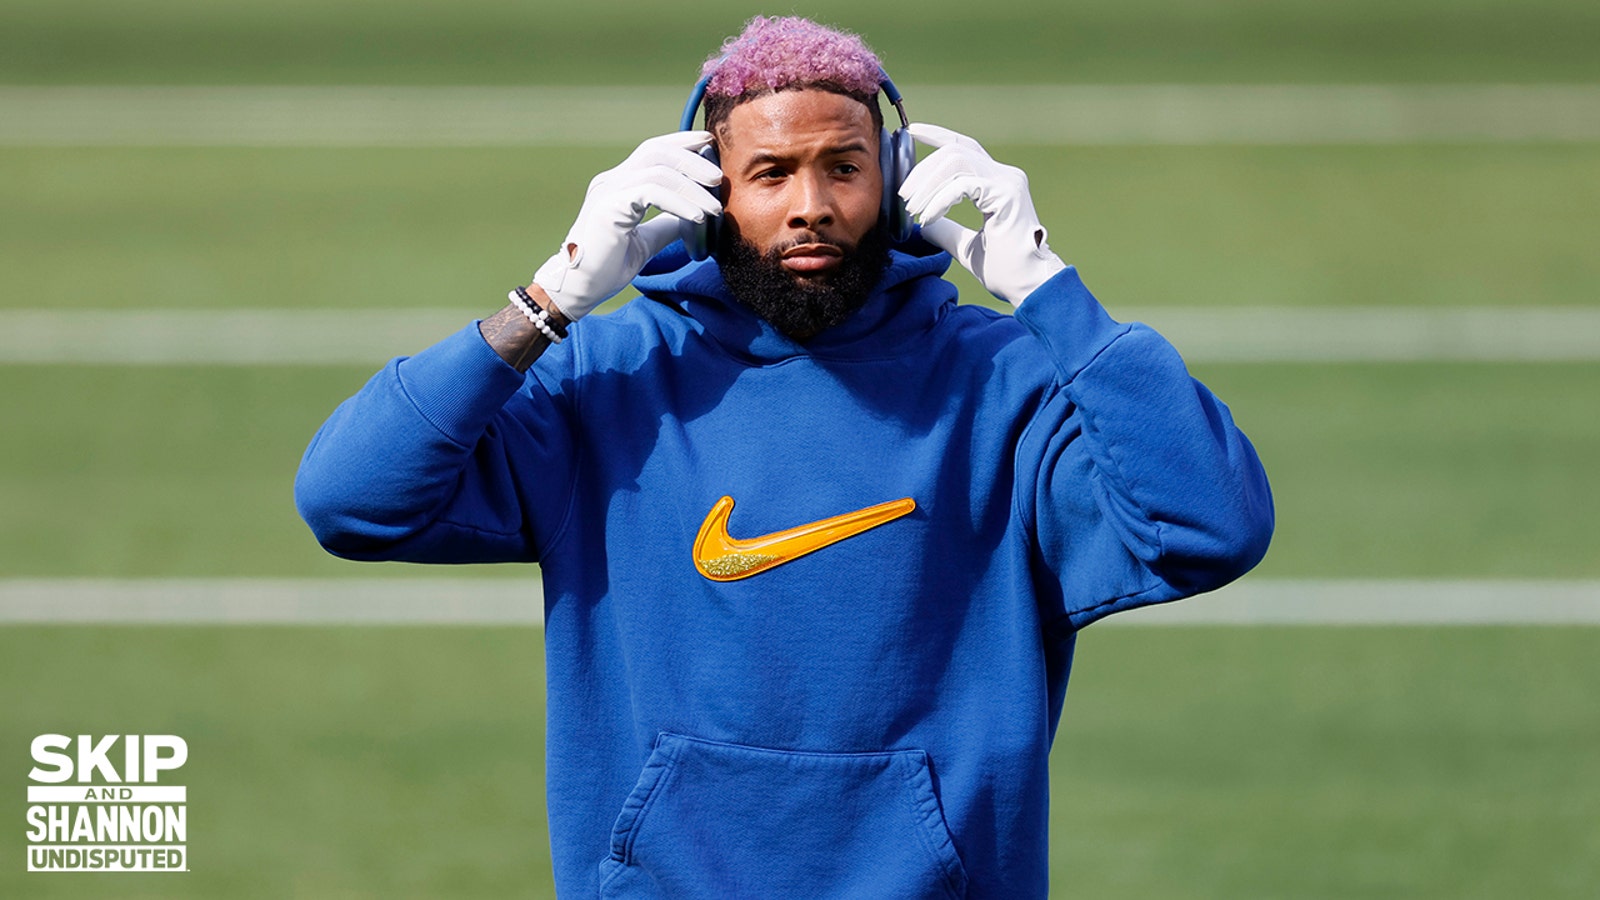 Tottenham Hotspur - Odell Beckham Jr with his personalised